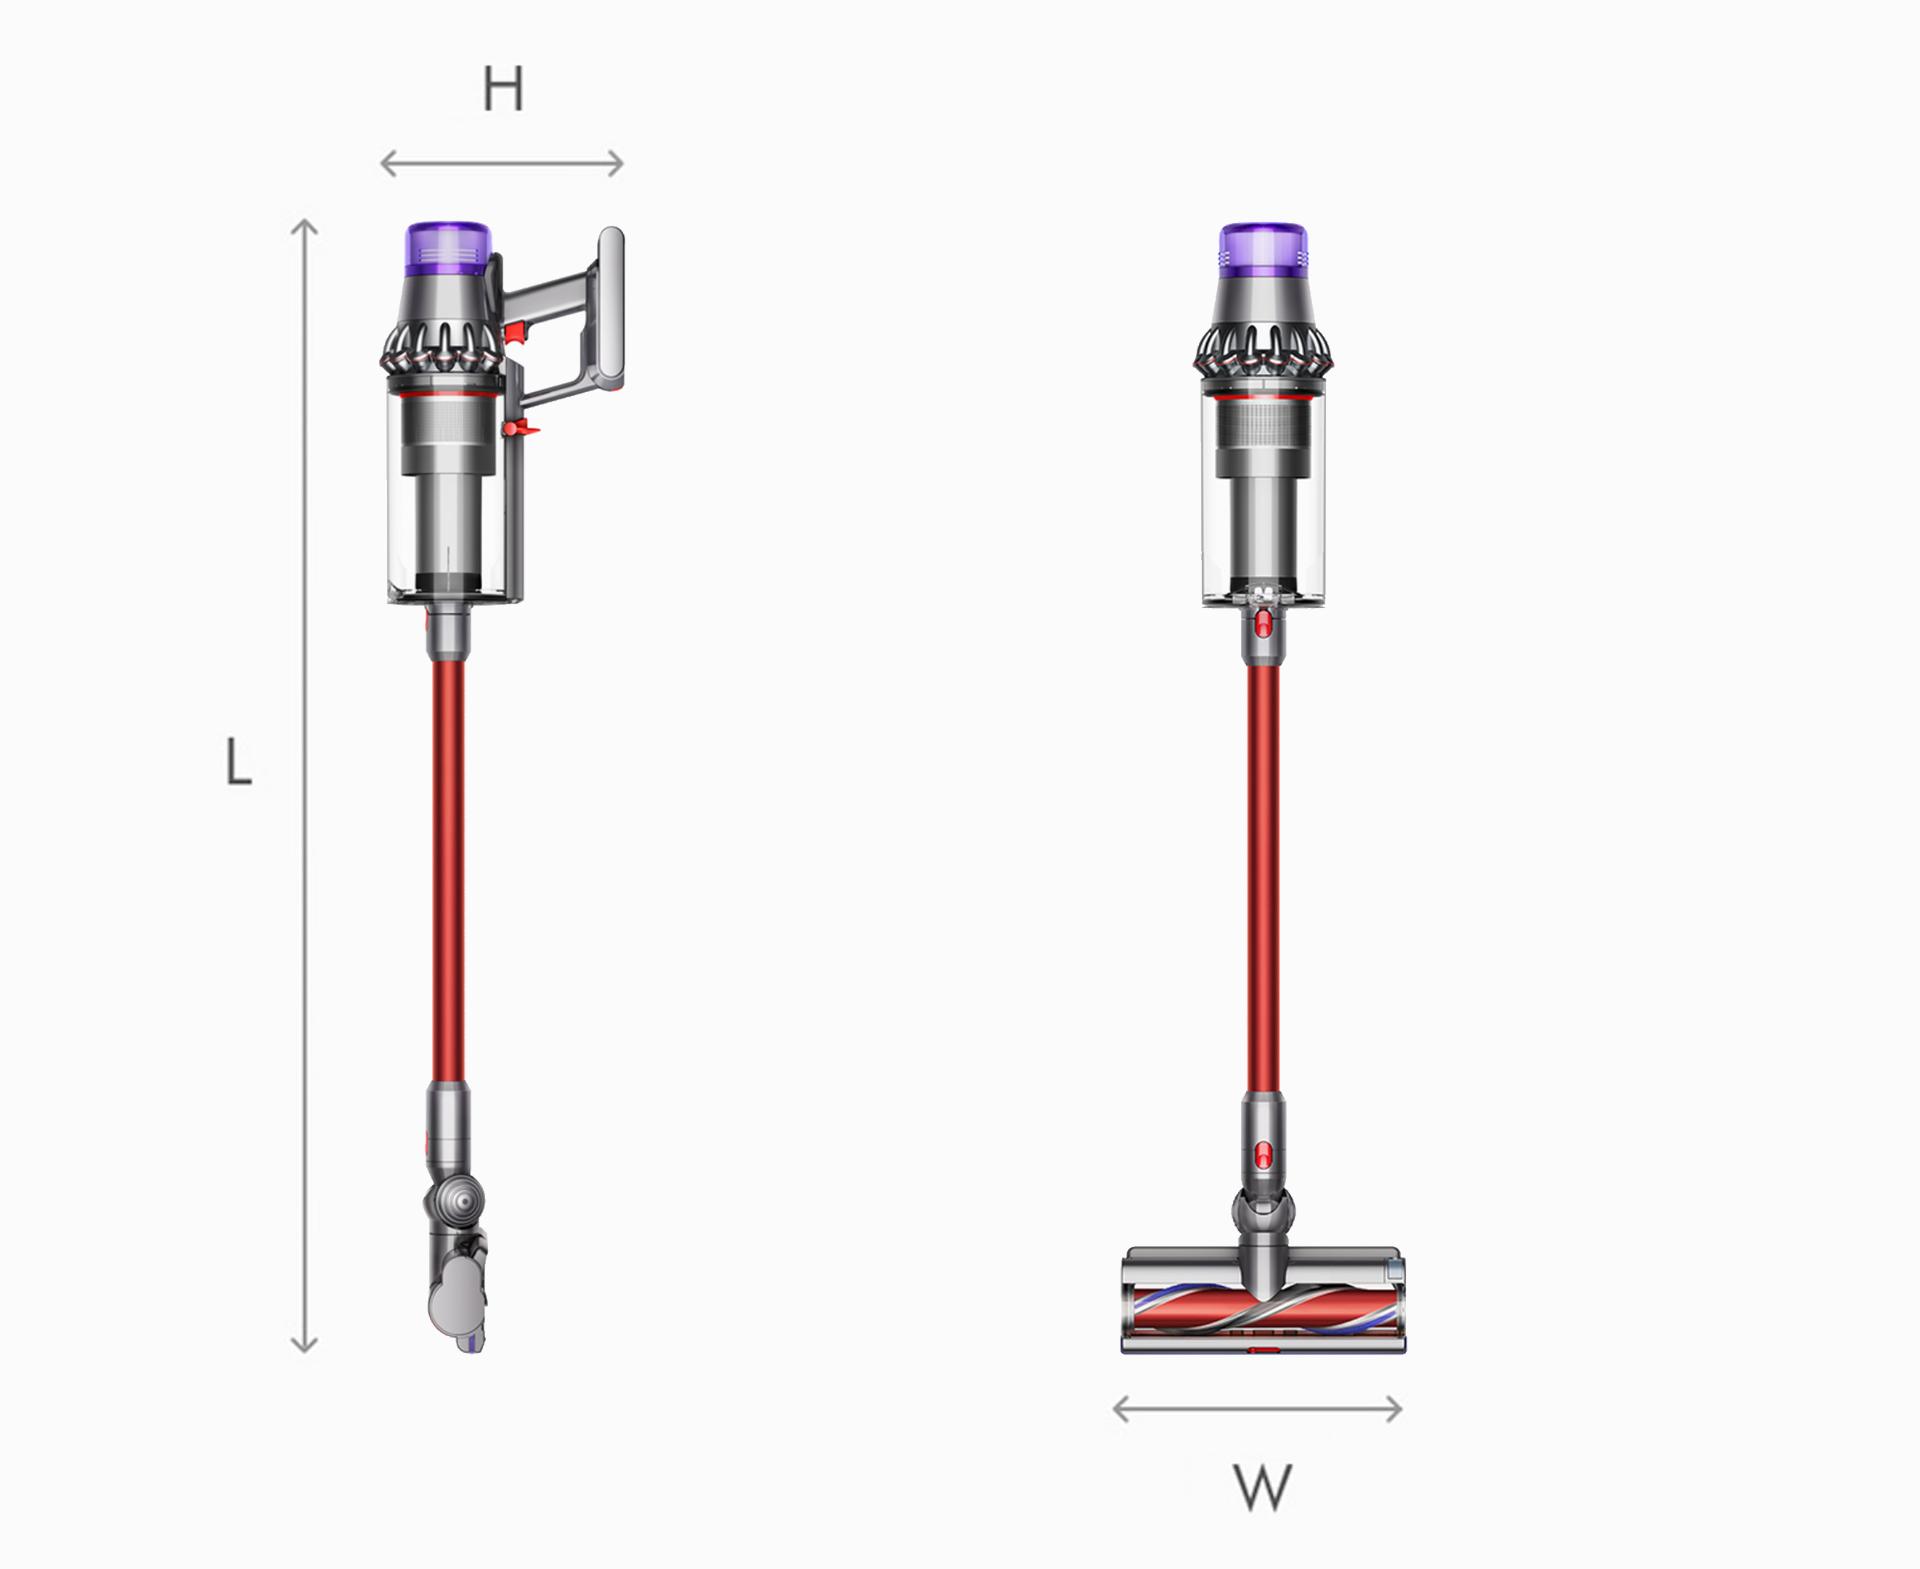 Illustration of Dyson V11 Outsize vaccum cleaner dimensions